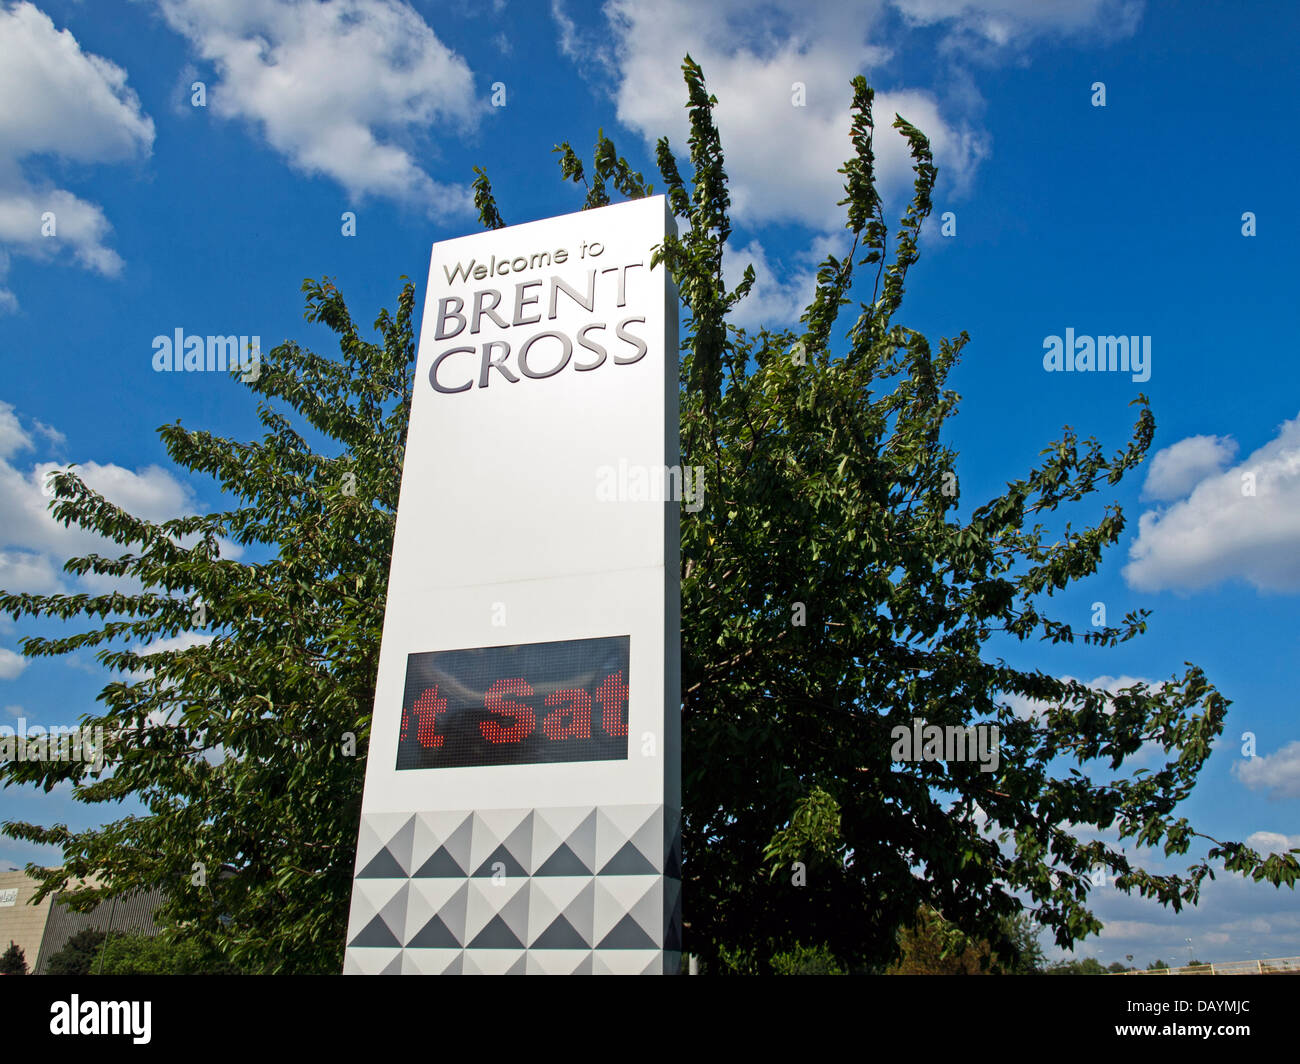 Brent Cross Shopping Centre 'Welcome' sign, London Borough of Barnet, North London, England, United Kingdom Stock Photo